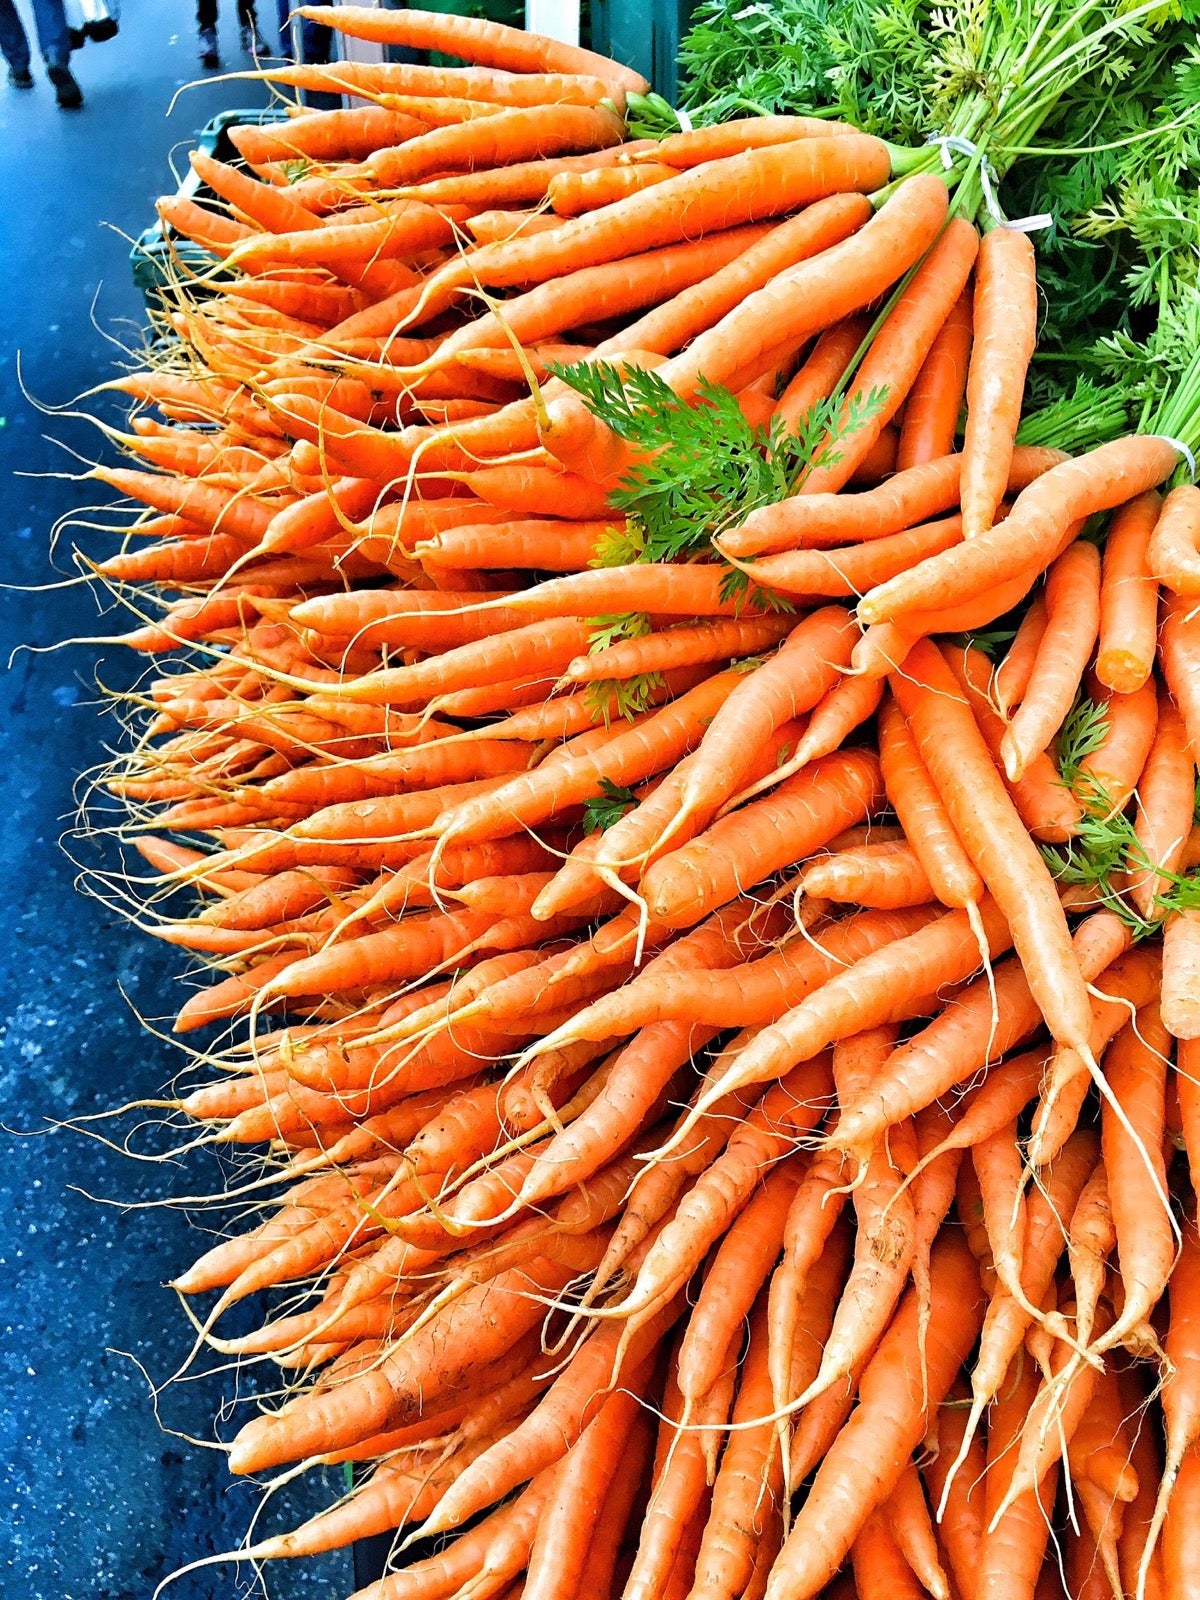 Bunches of thin carrots stacked on a stand at a farmers' market.